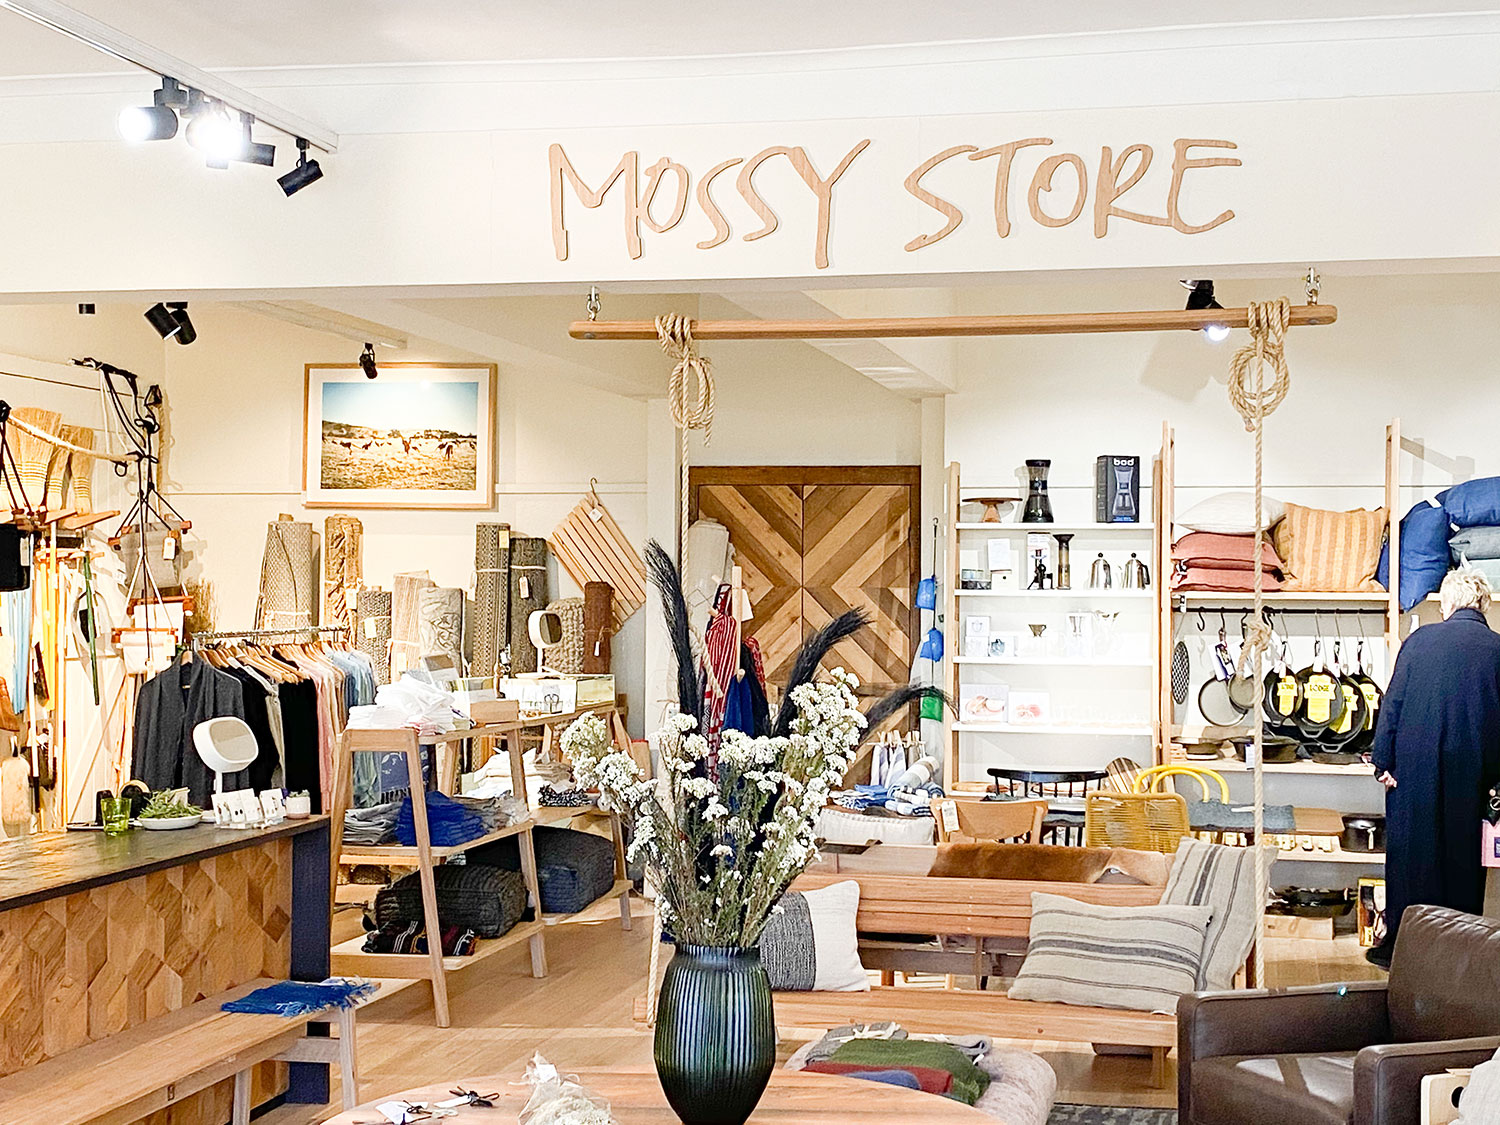 Mossy Store - one of the many lifestyle store destinations in Moss Vale